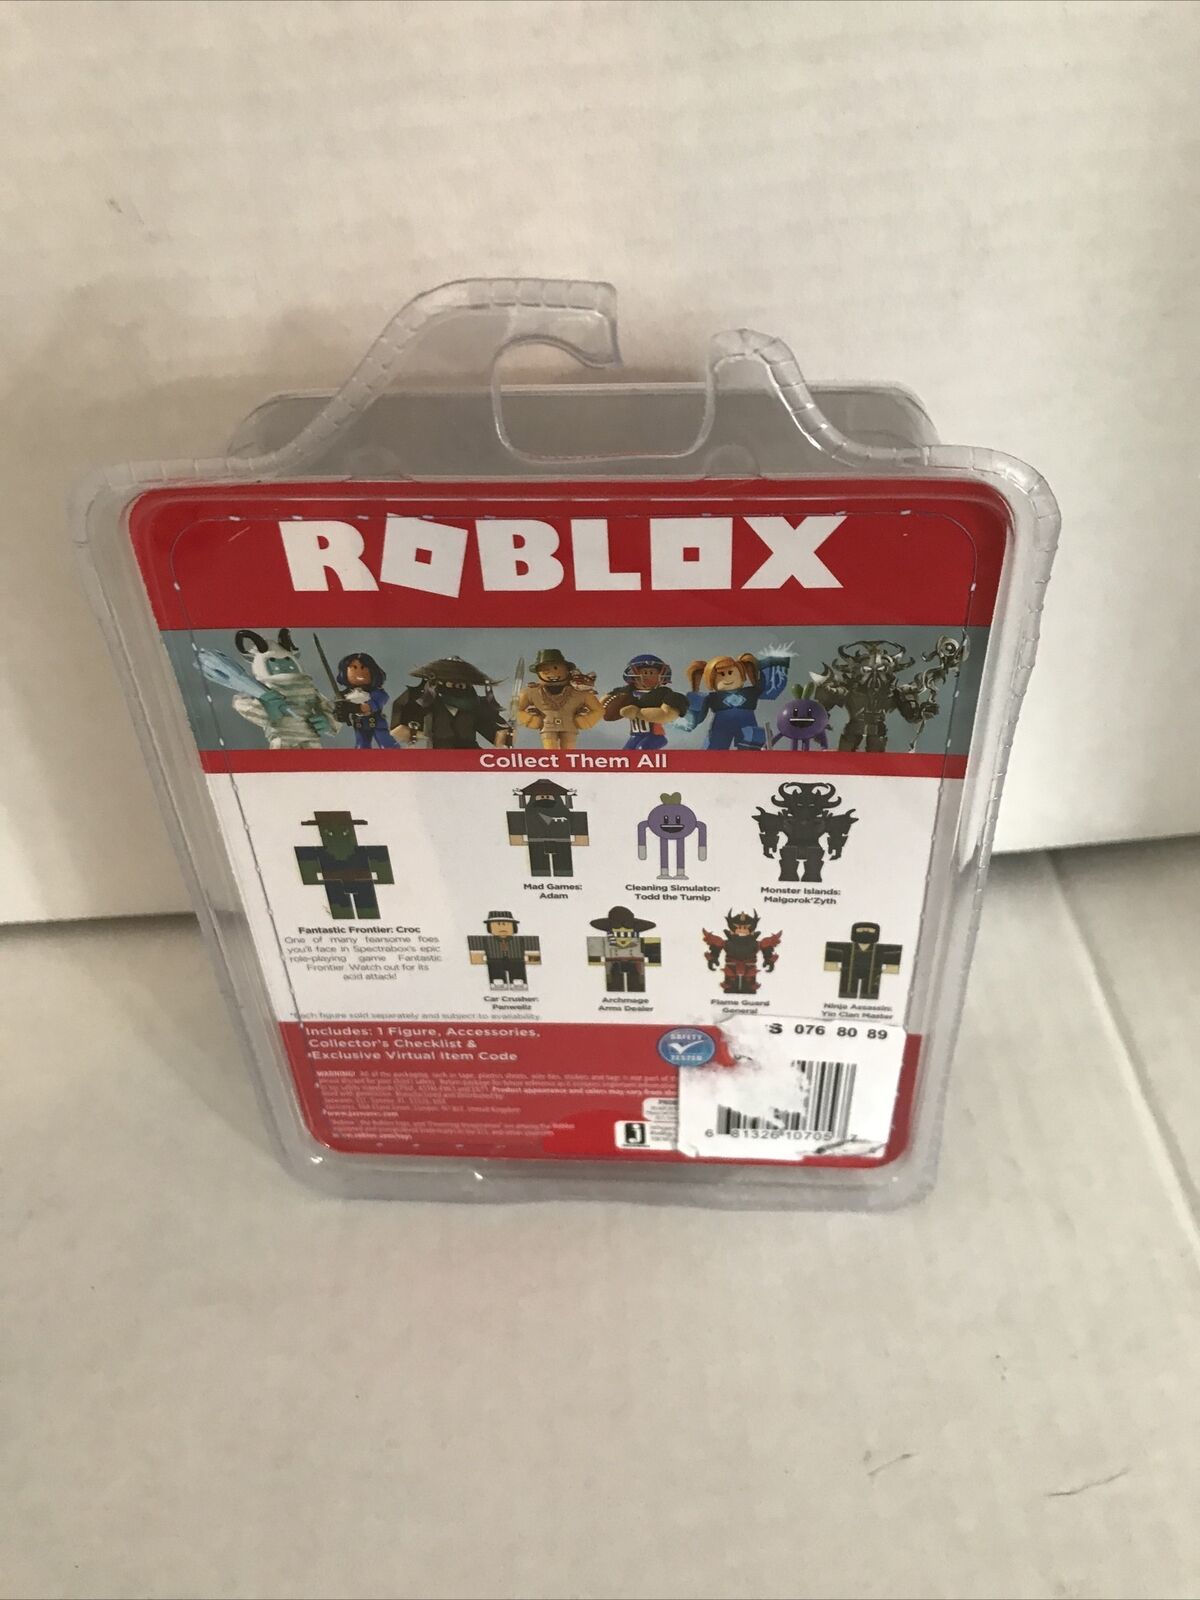 Roblox Fantastic Frontier Croc New With And 50 Similar Items - roblox fantastic frontier croc